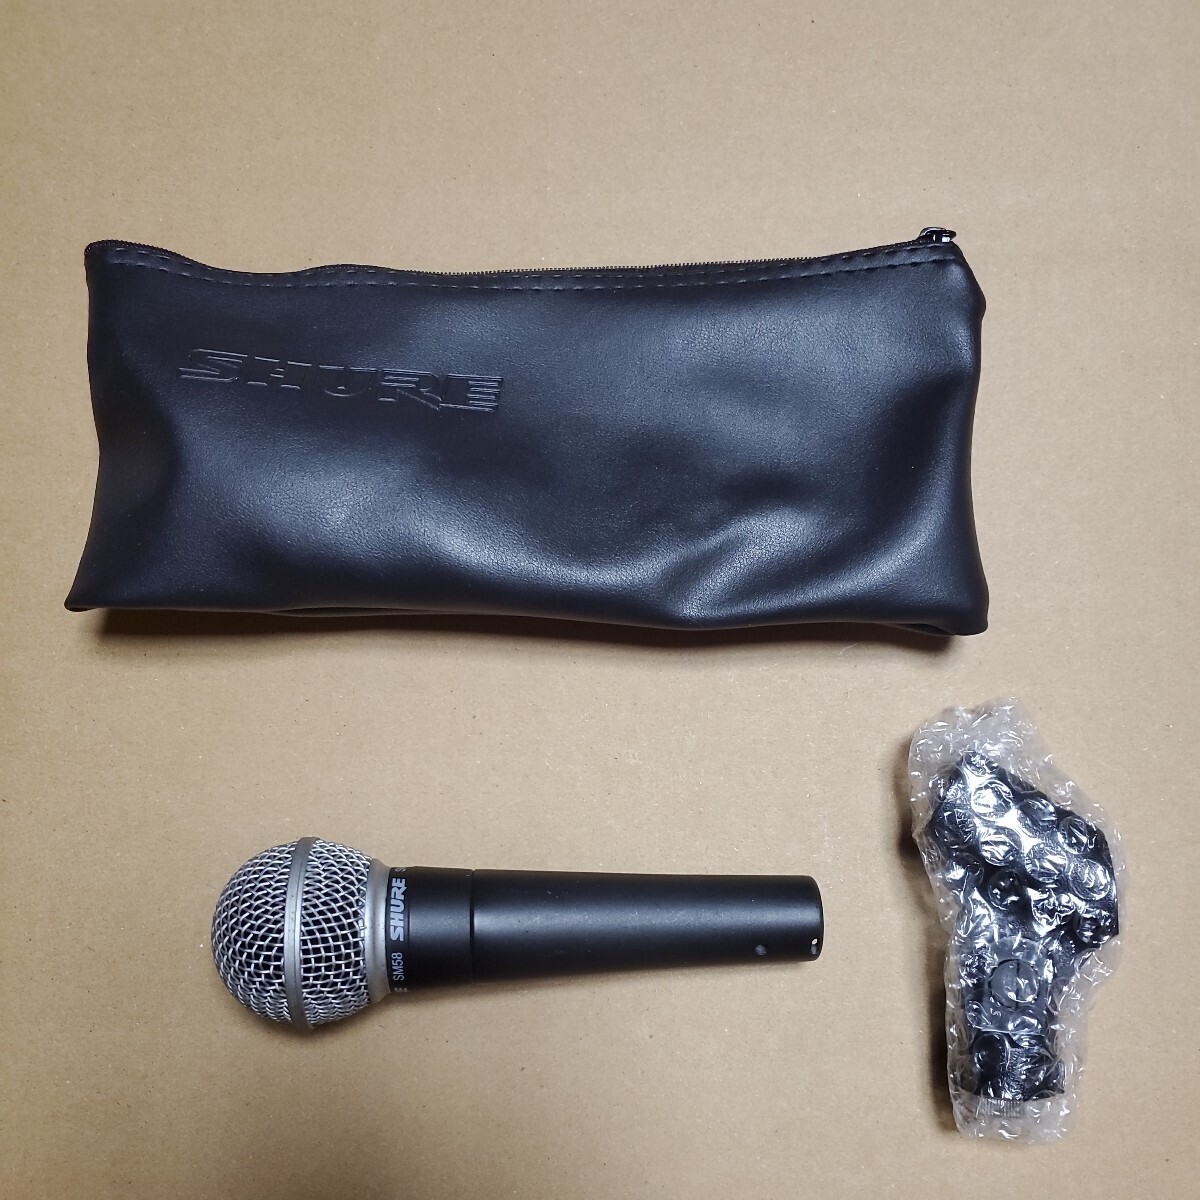  Mike Shure SM58-LCE Vocal for electrodynamic microphone ro phone operation verification ending finest quality beautiful goods ①